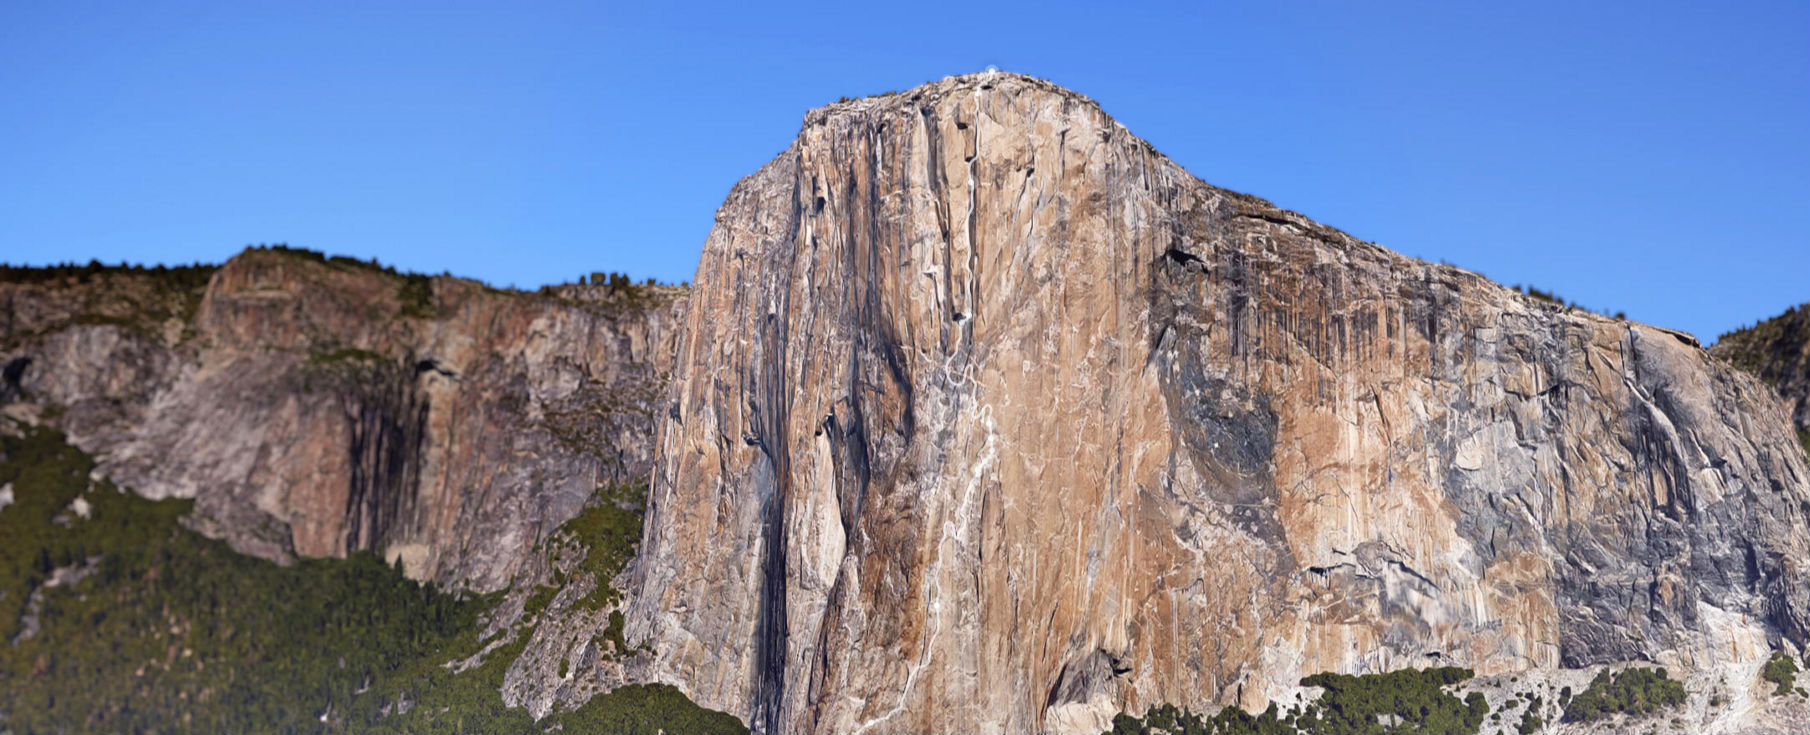 Google's first vertical Street View used climbers Alex Honnold and Tommy Caldwell to map The Nose on El Capitan